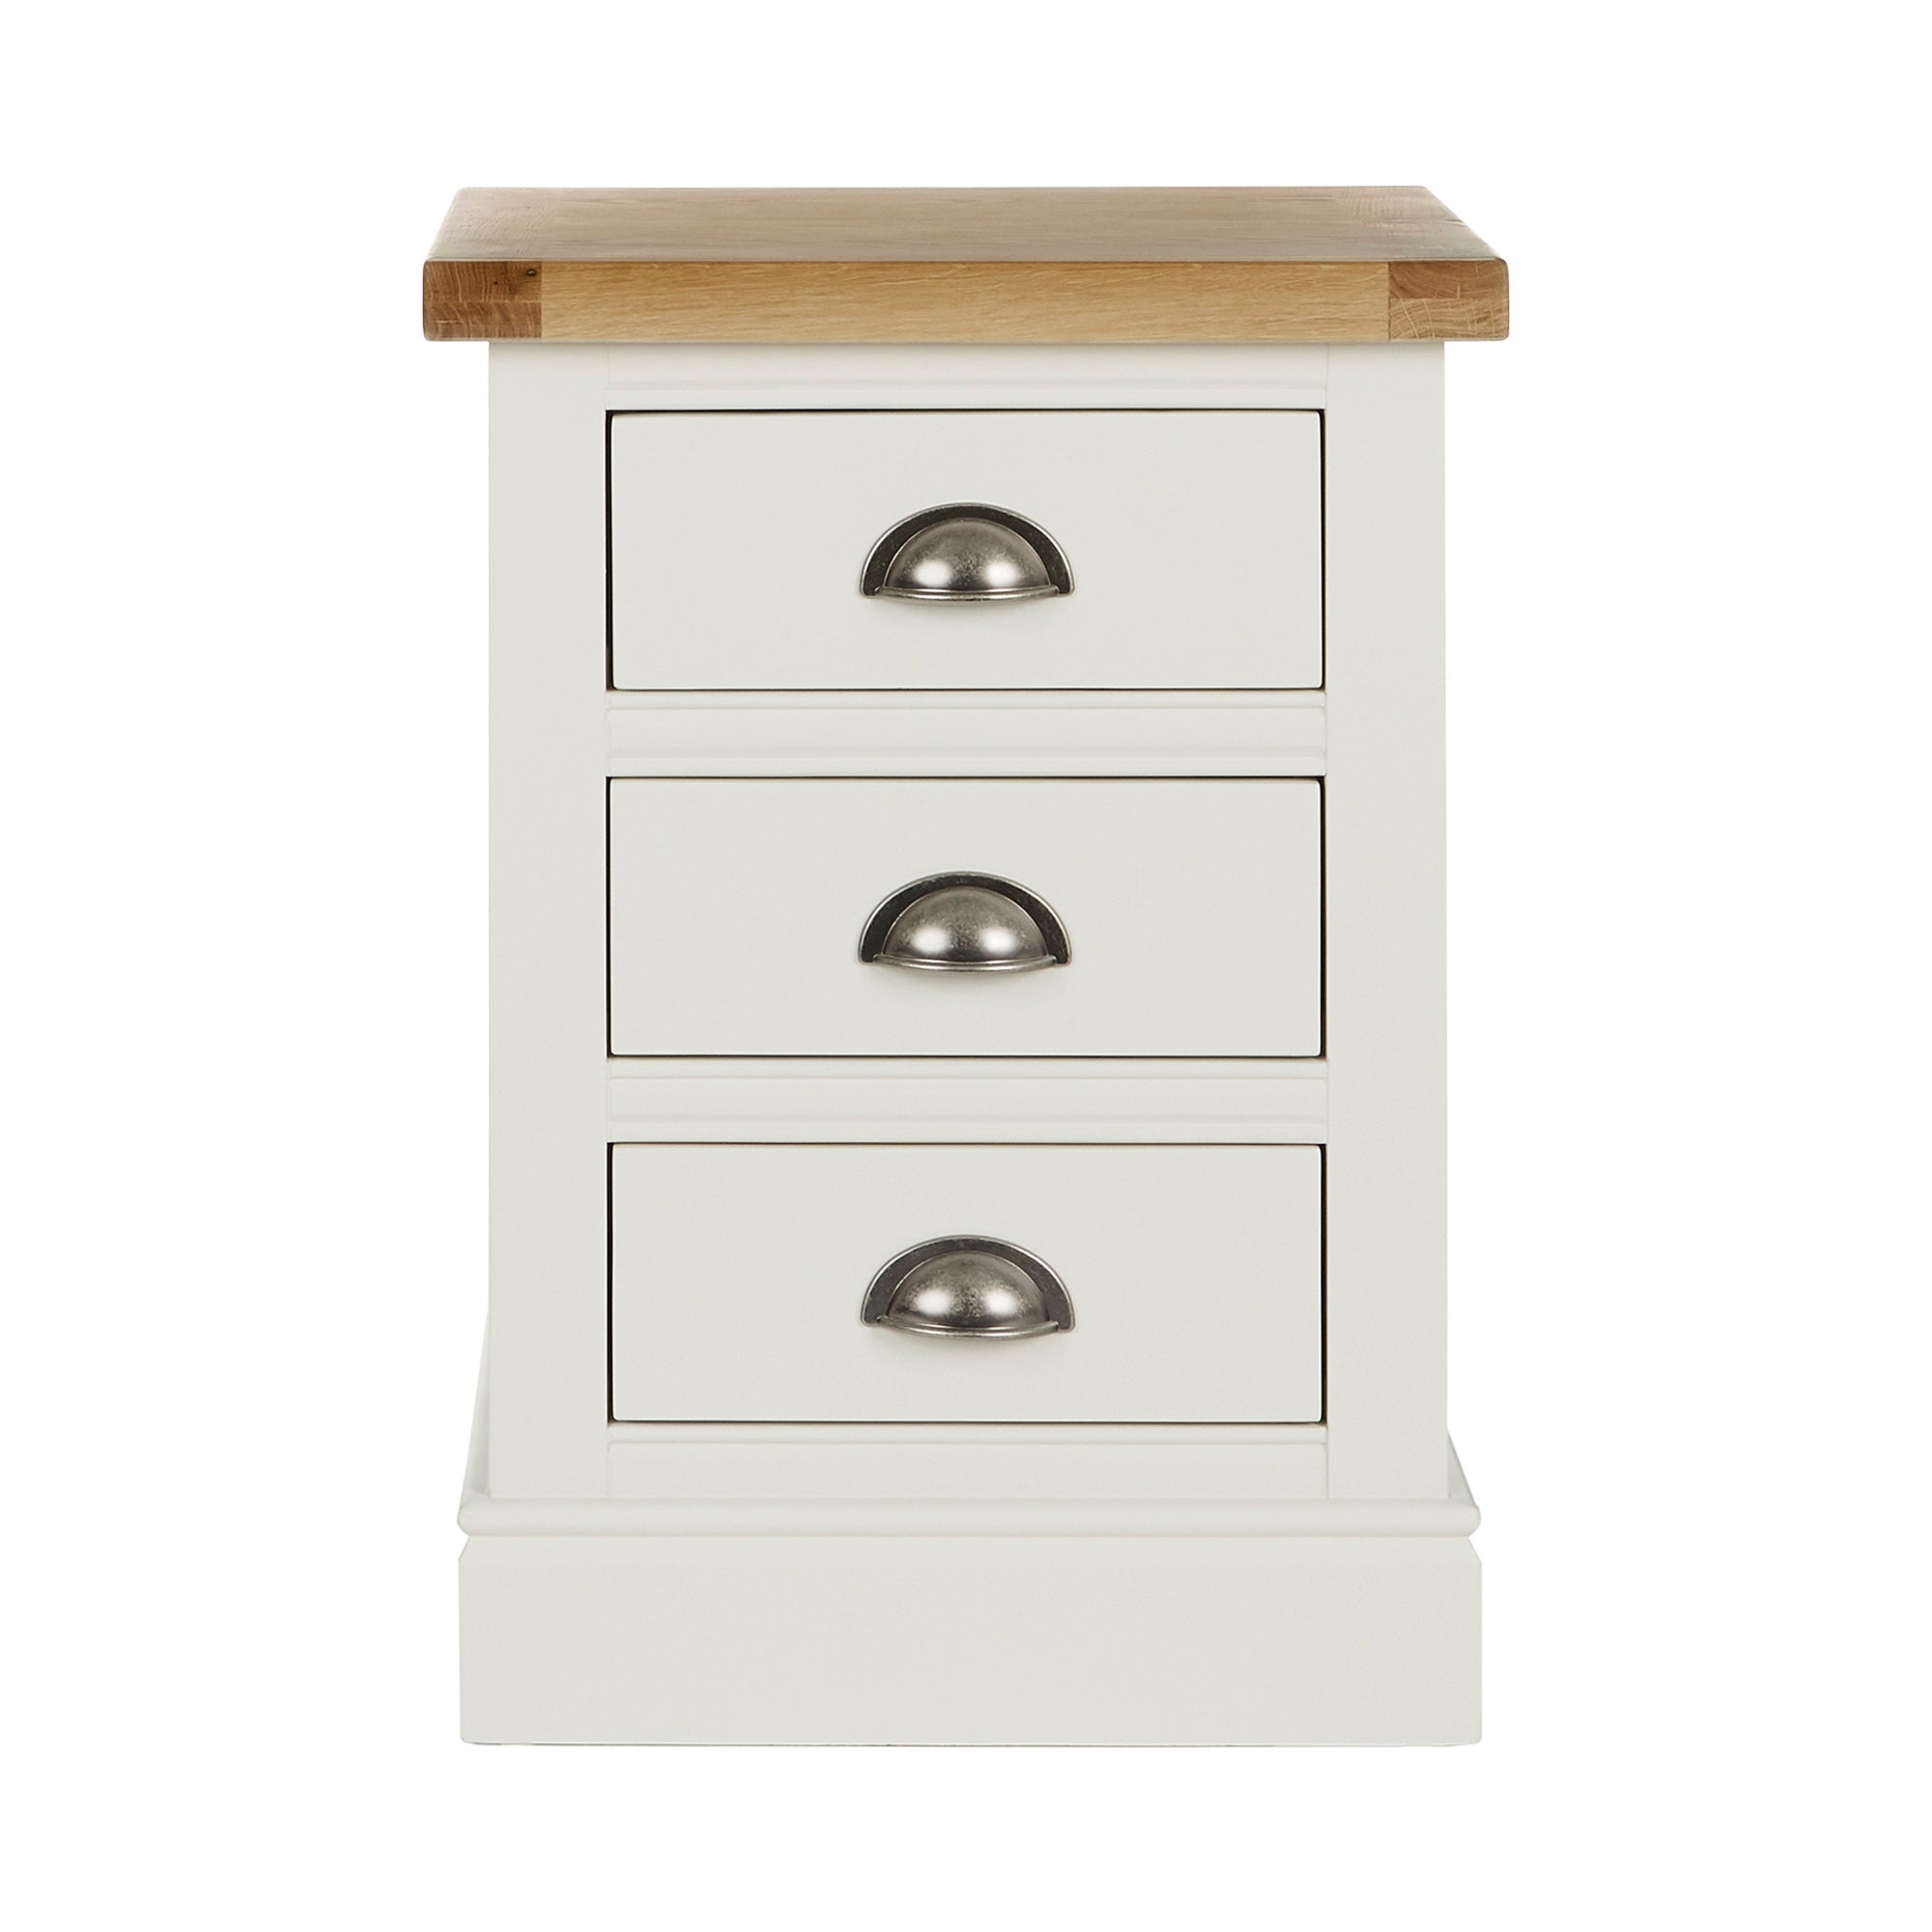 Compton 3 Drawer Bedside Table Ivory Oak Cream And Brown